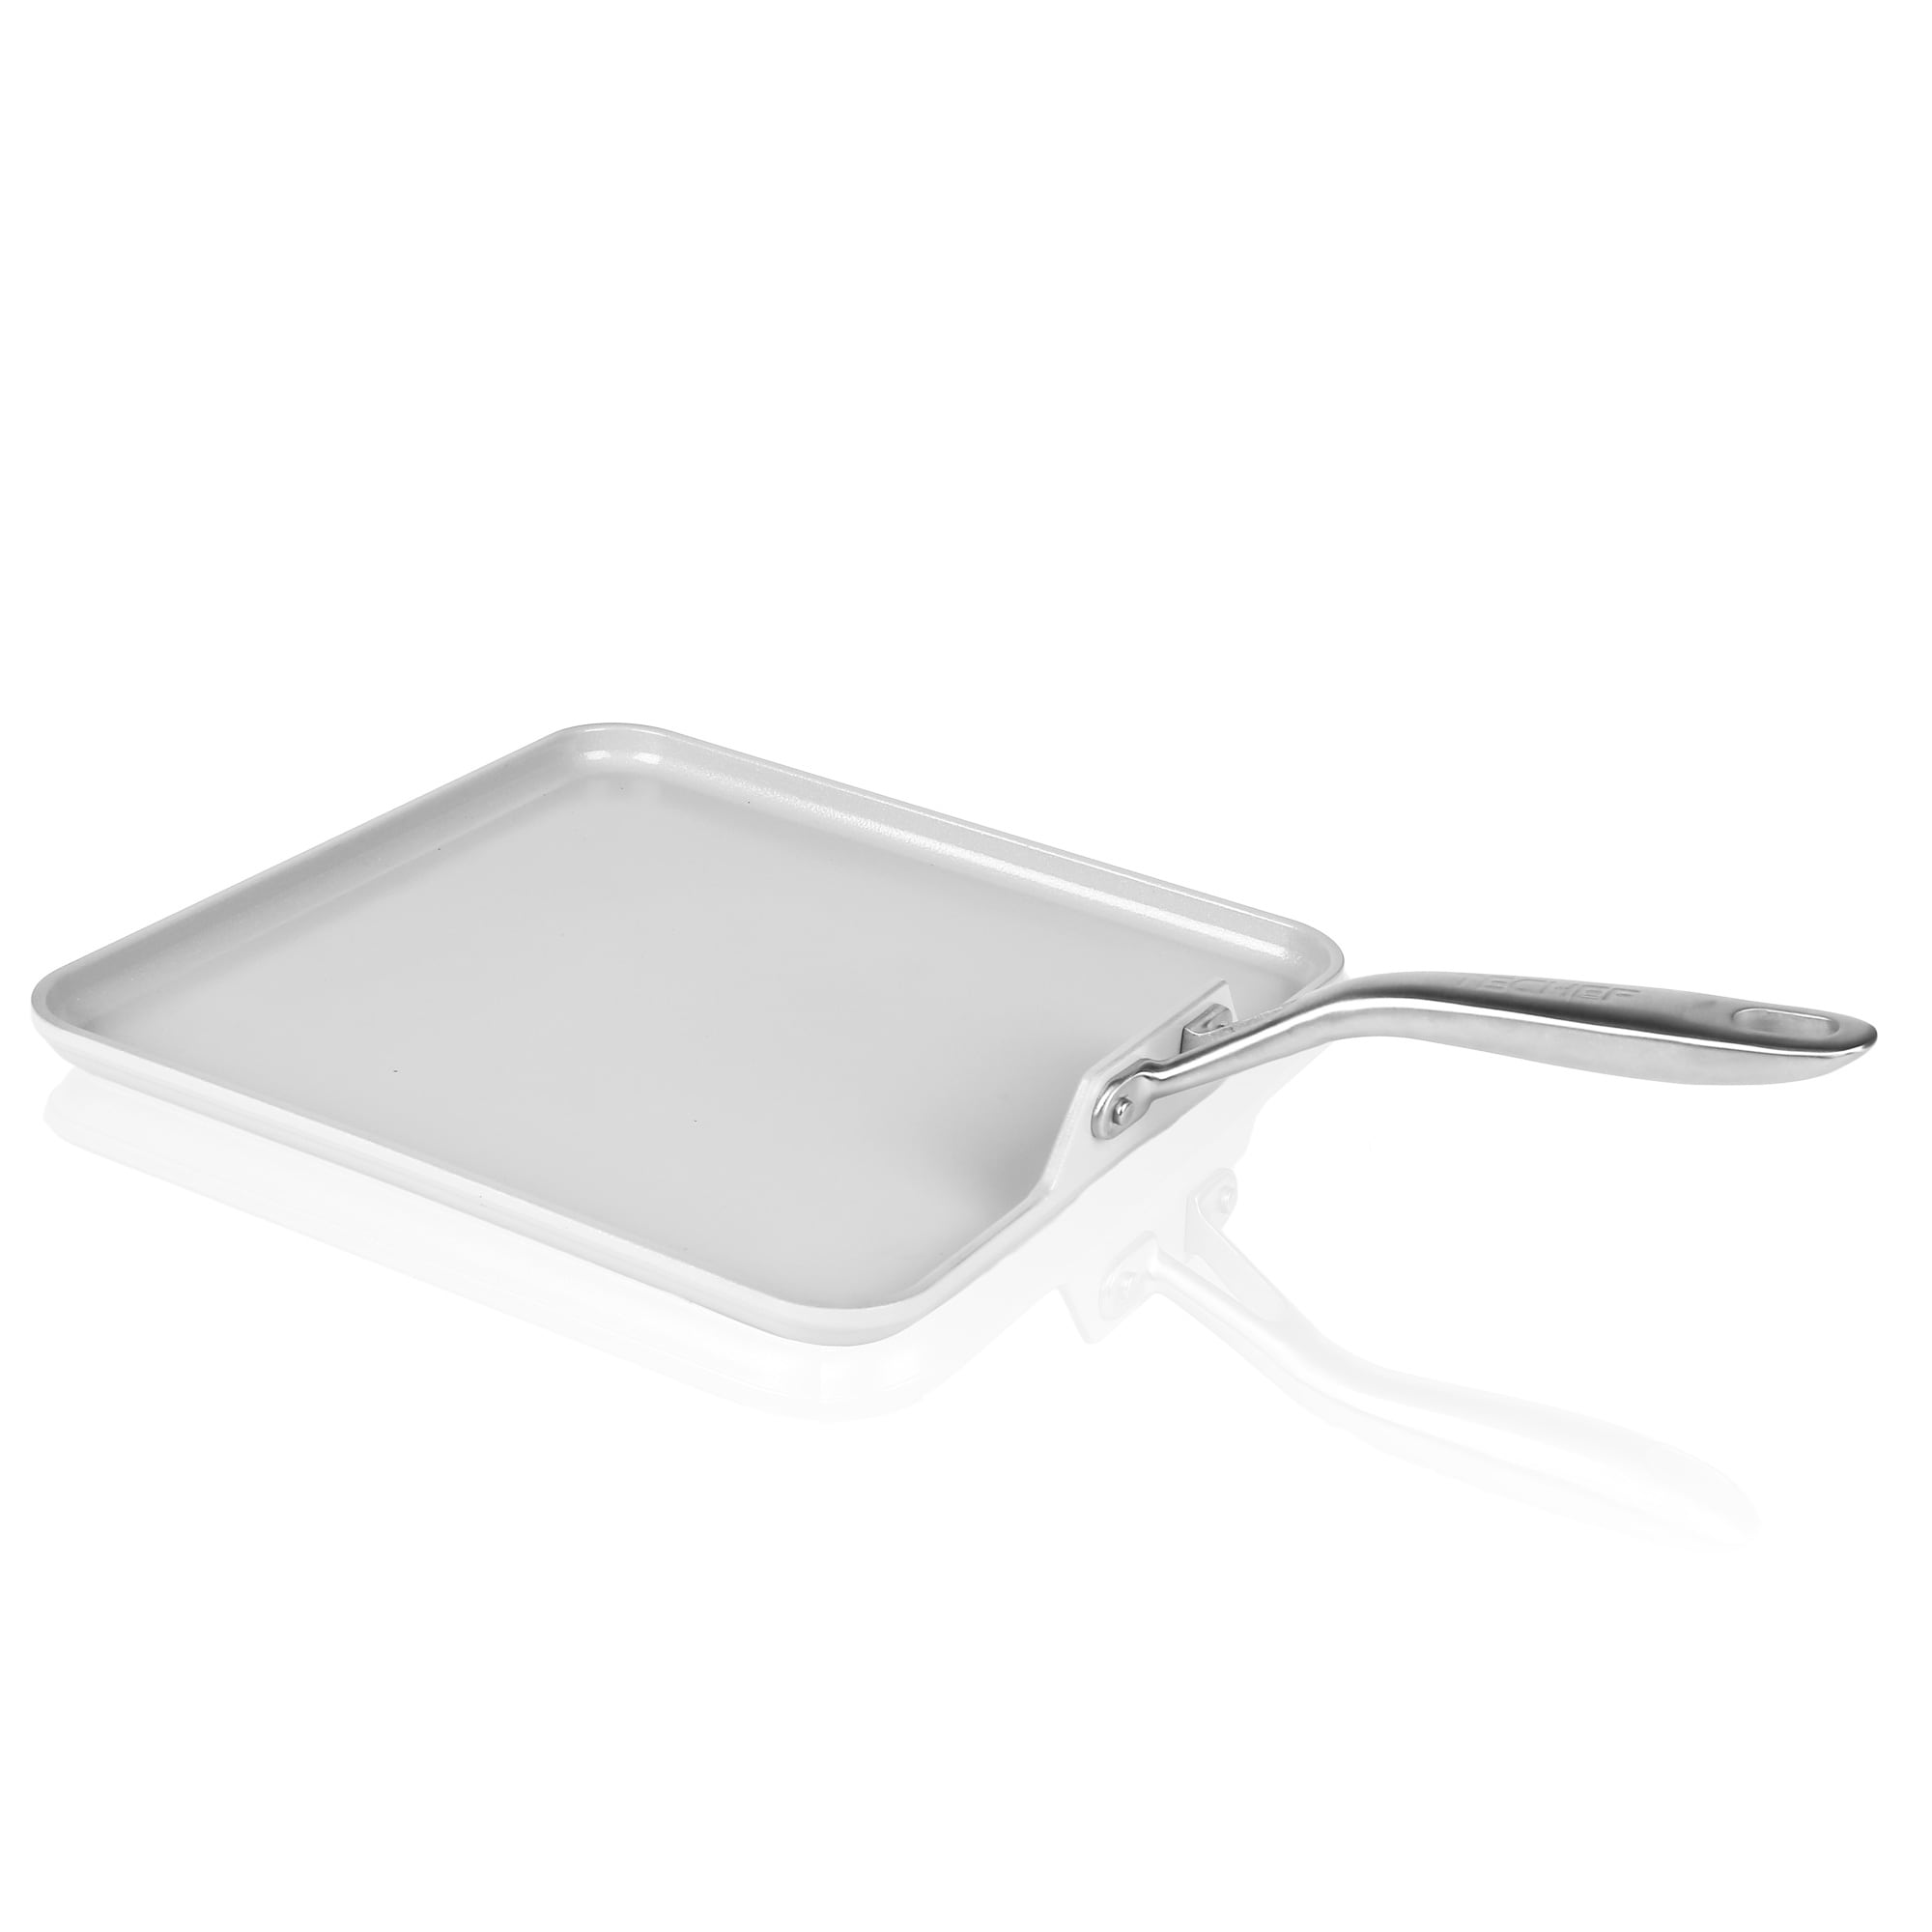 T-fal Easy Care Nonstick Square Griddle, 11 in - Harris Teeter